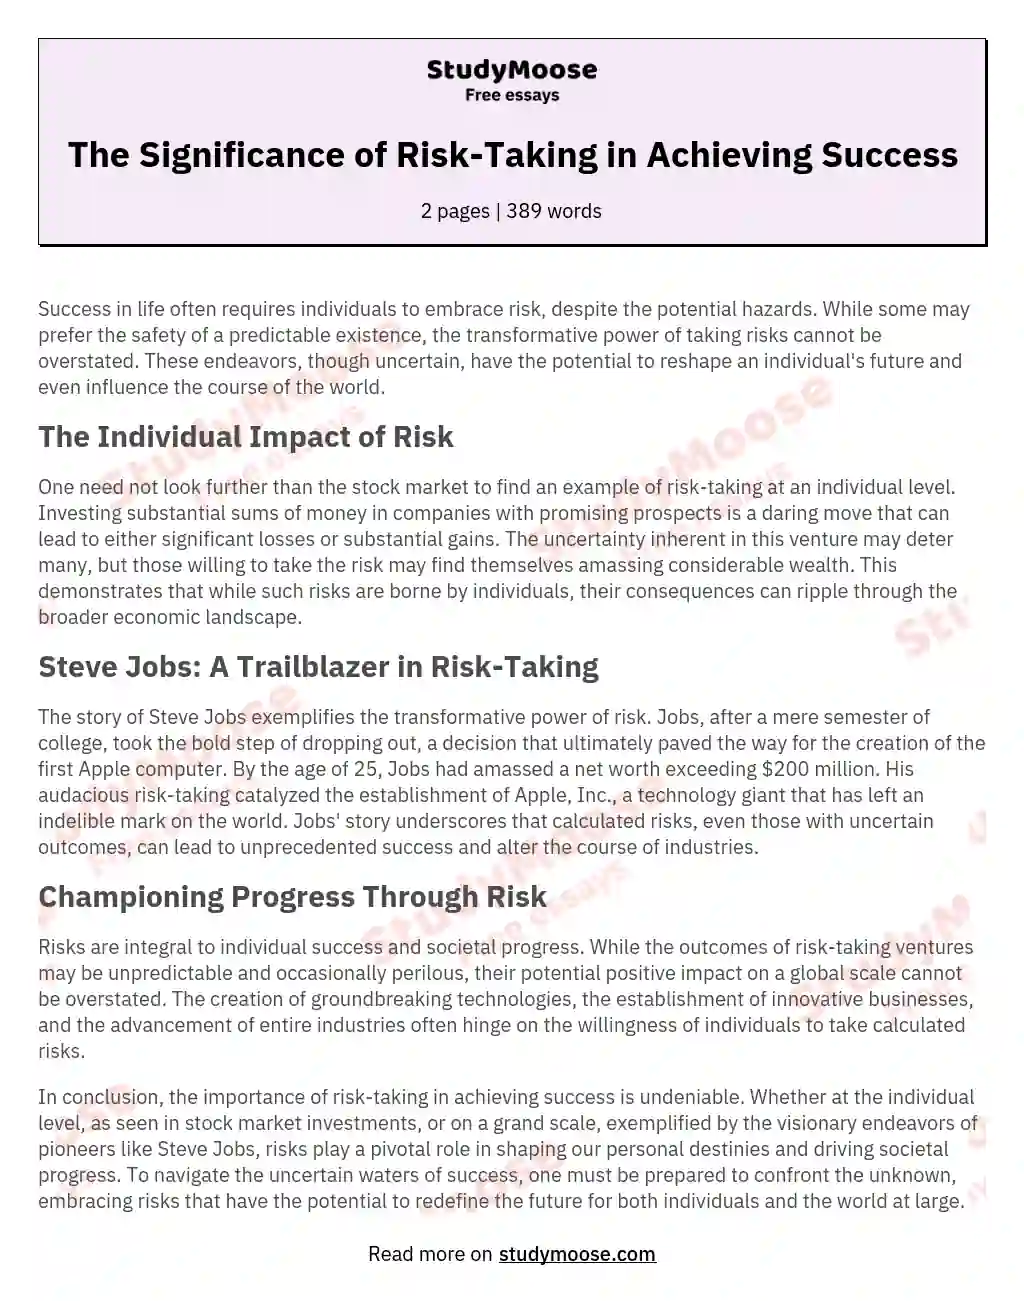 The Significance of Risk-Taking in Achieving Success essay